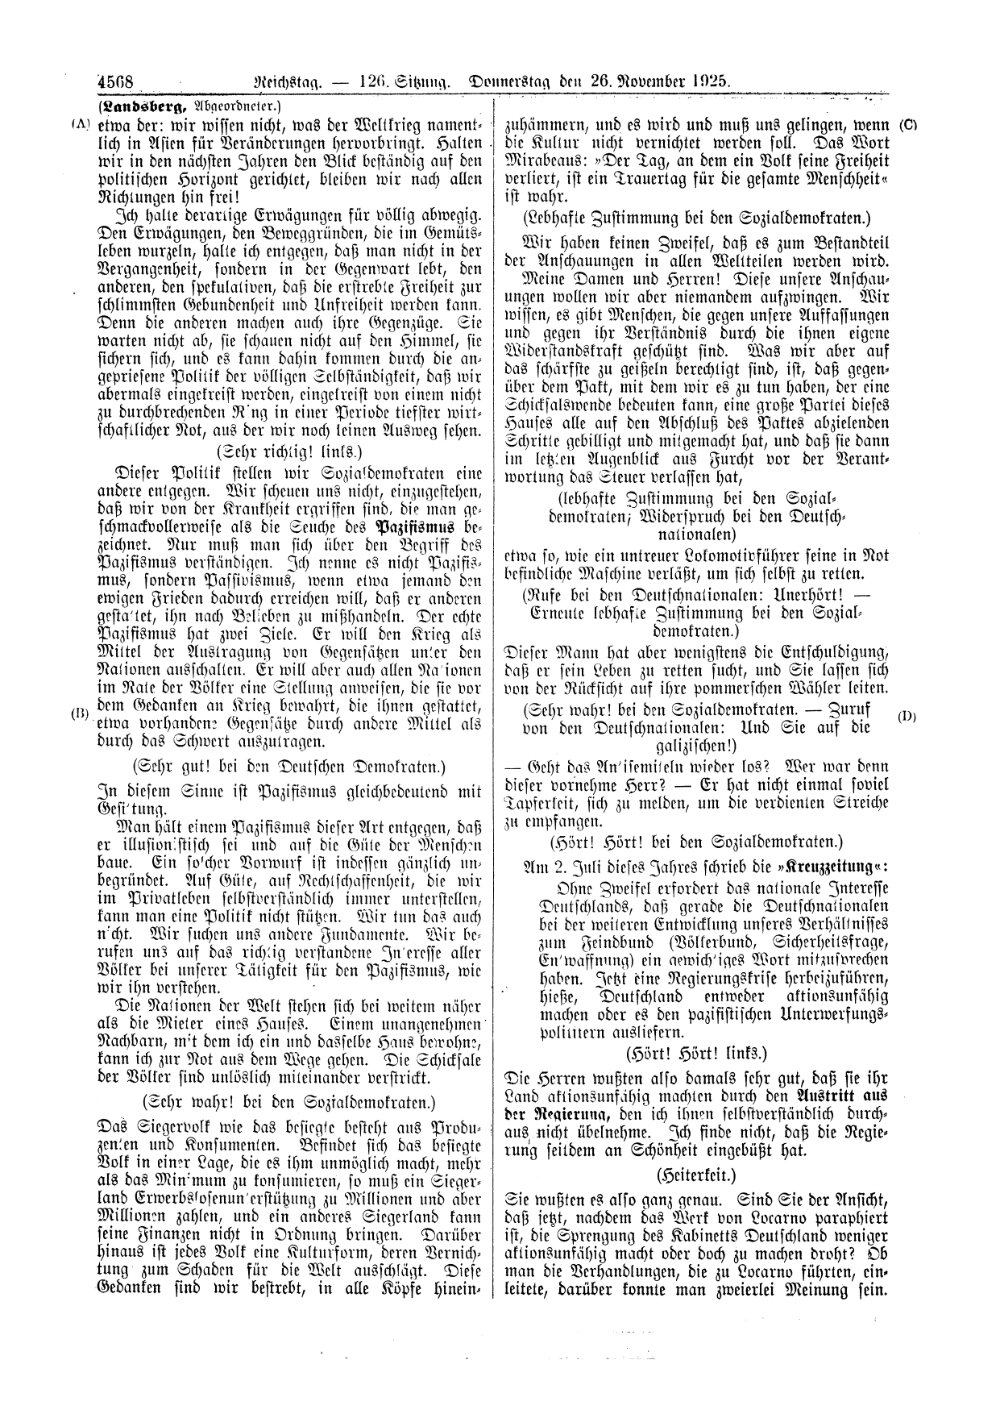 Scan of page 4568